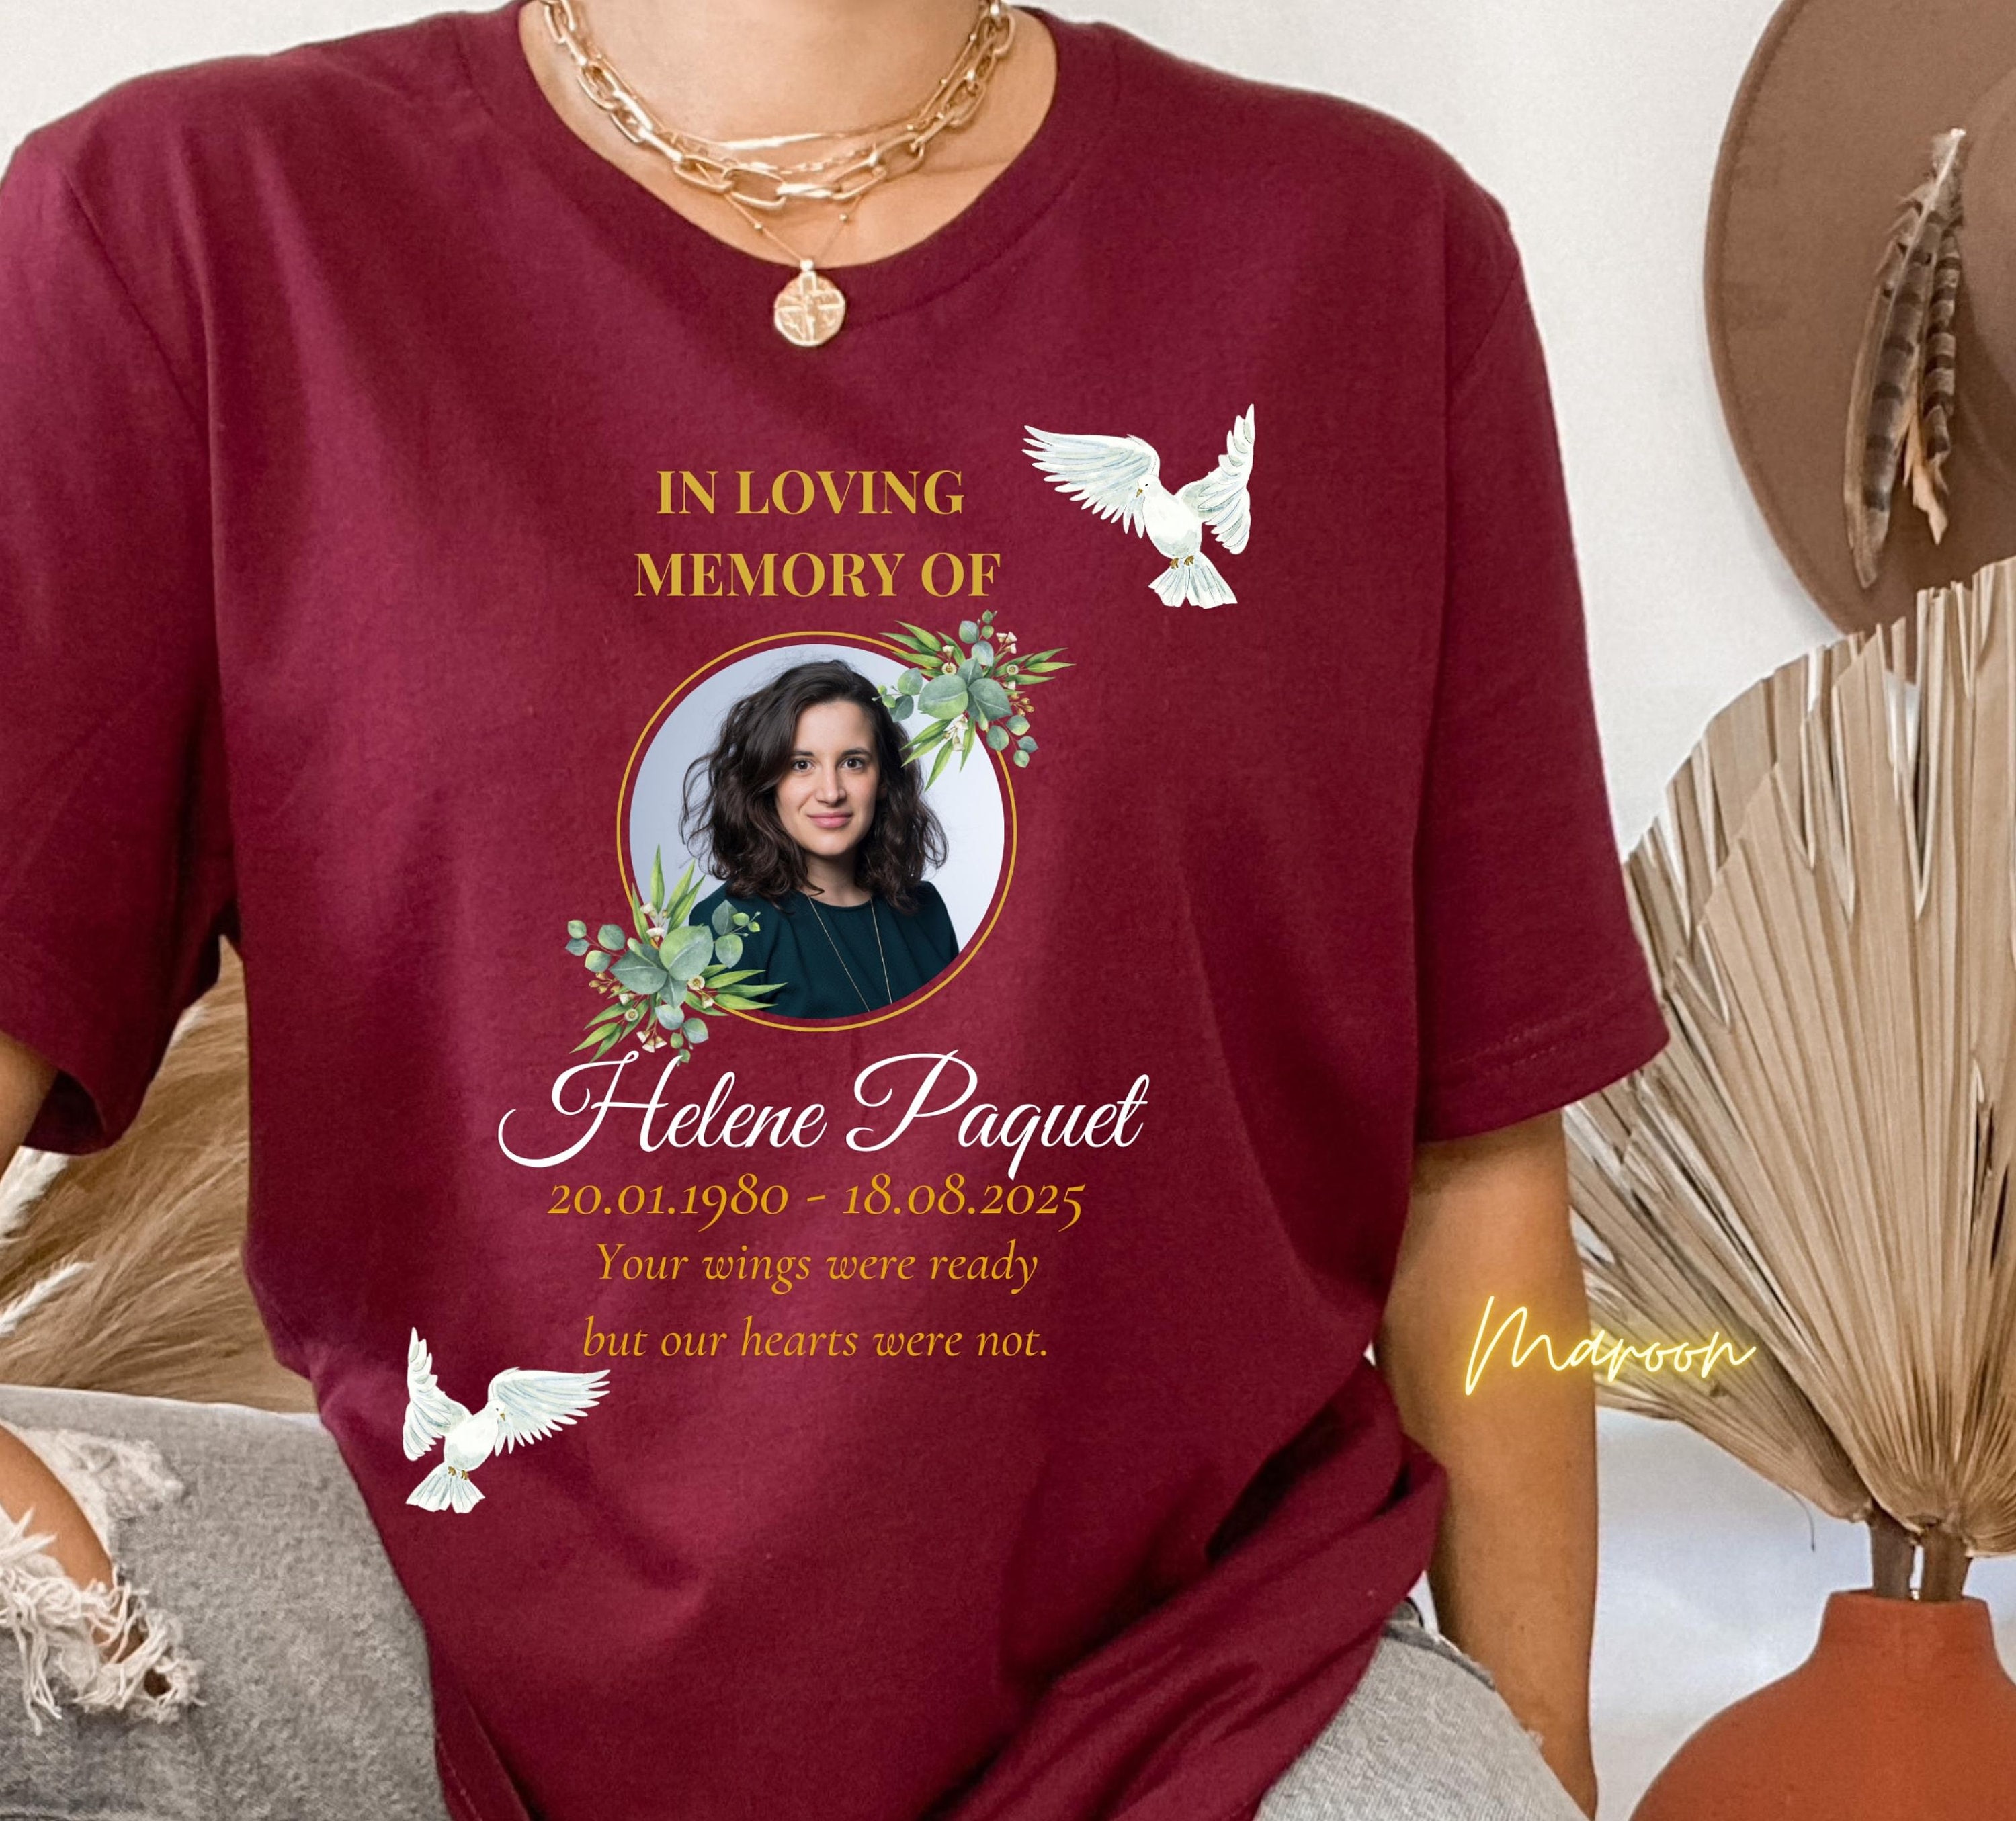 Customized Funeral T-shirt, Personalized Memorial T-shirt, Memorial Shirt,  Memorial Tees, Family Memorial Shirts, Rest in Peace Tshirt -  Canada